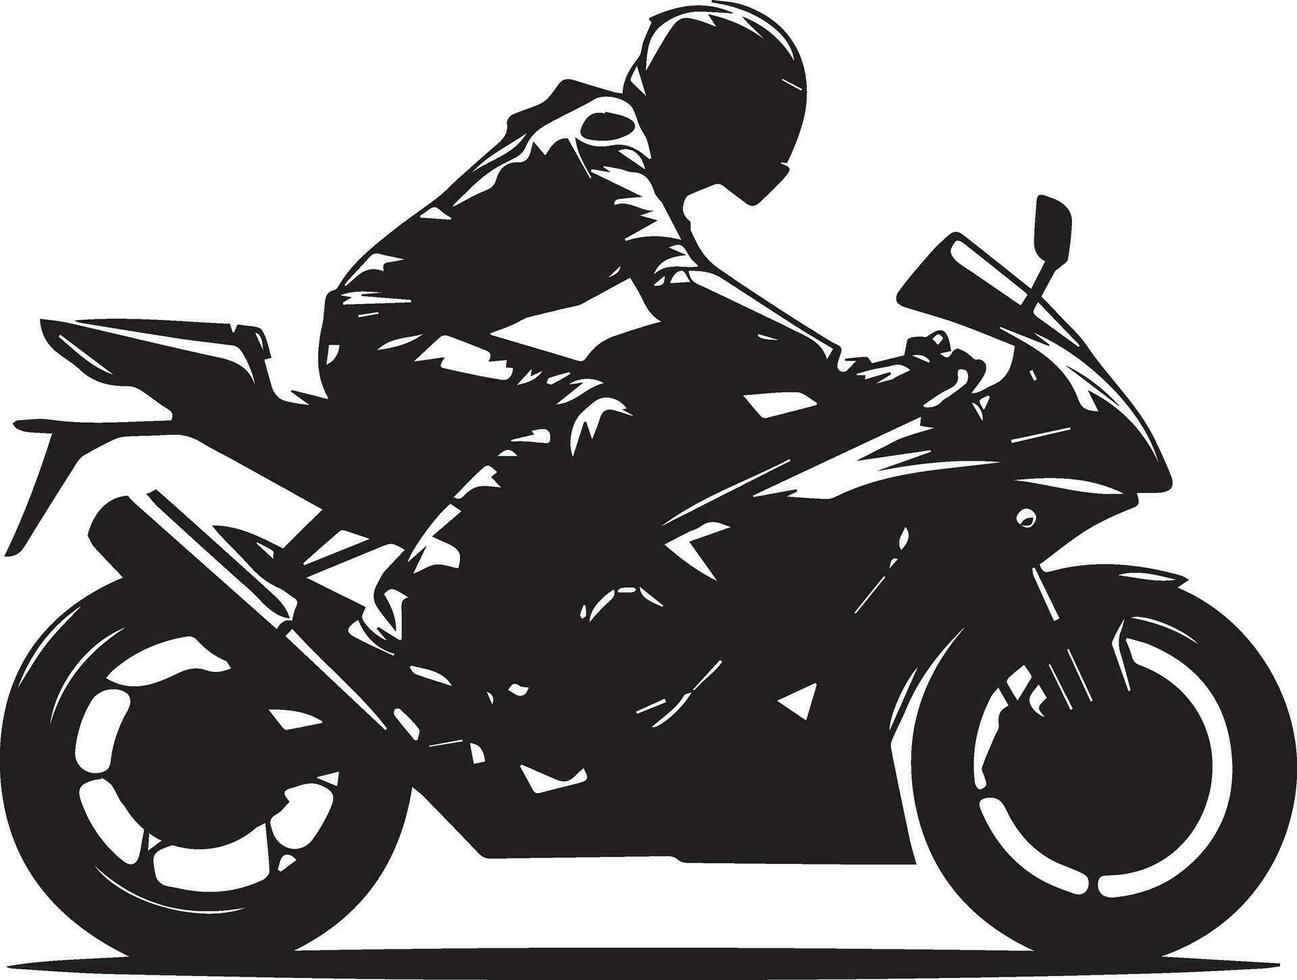 a man ride a motorcycle vector silhouette illustration